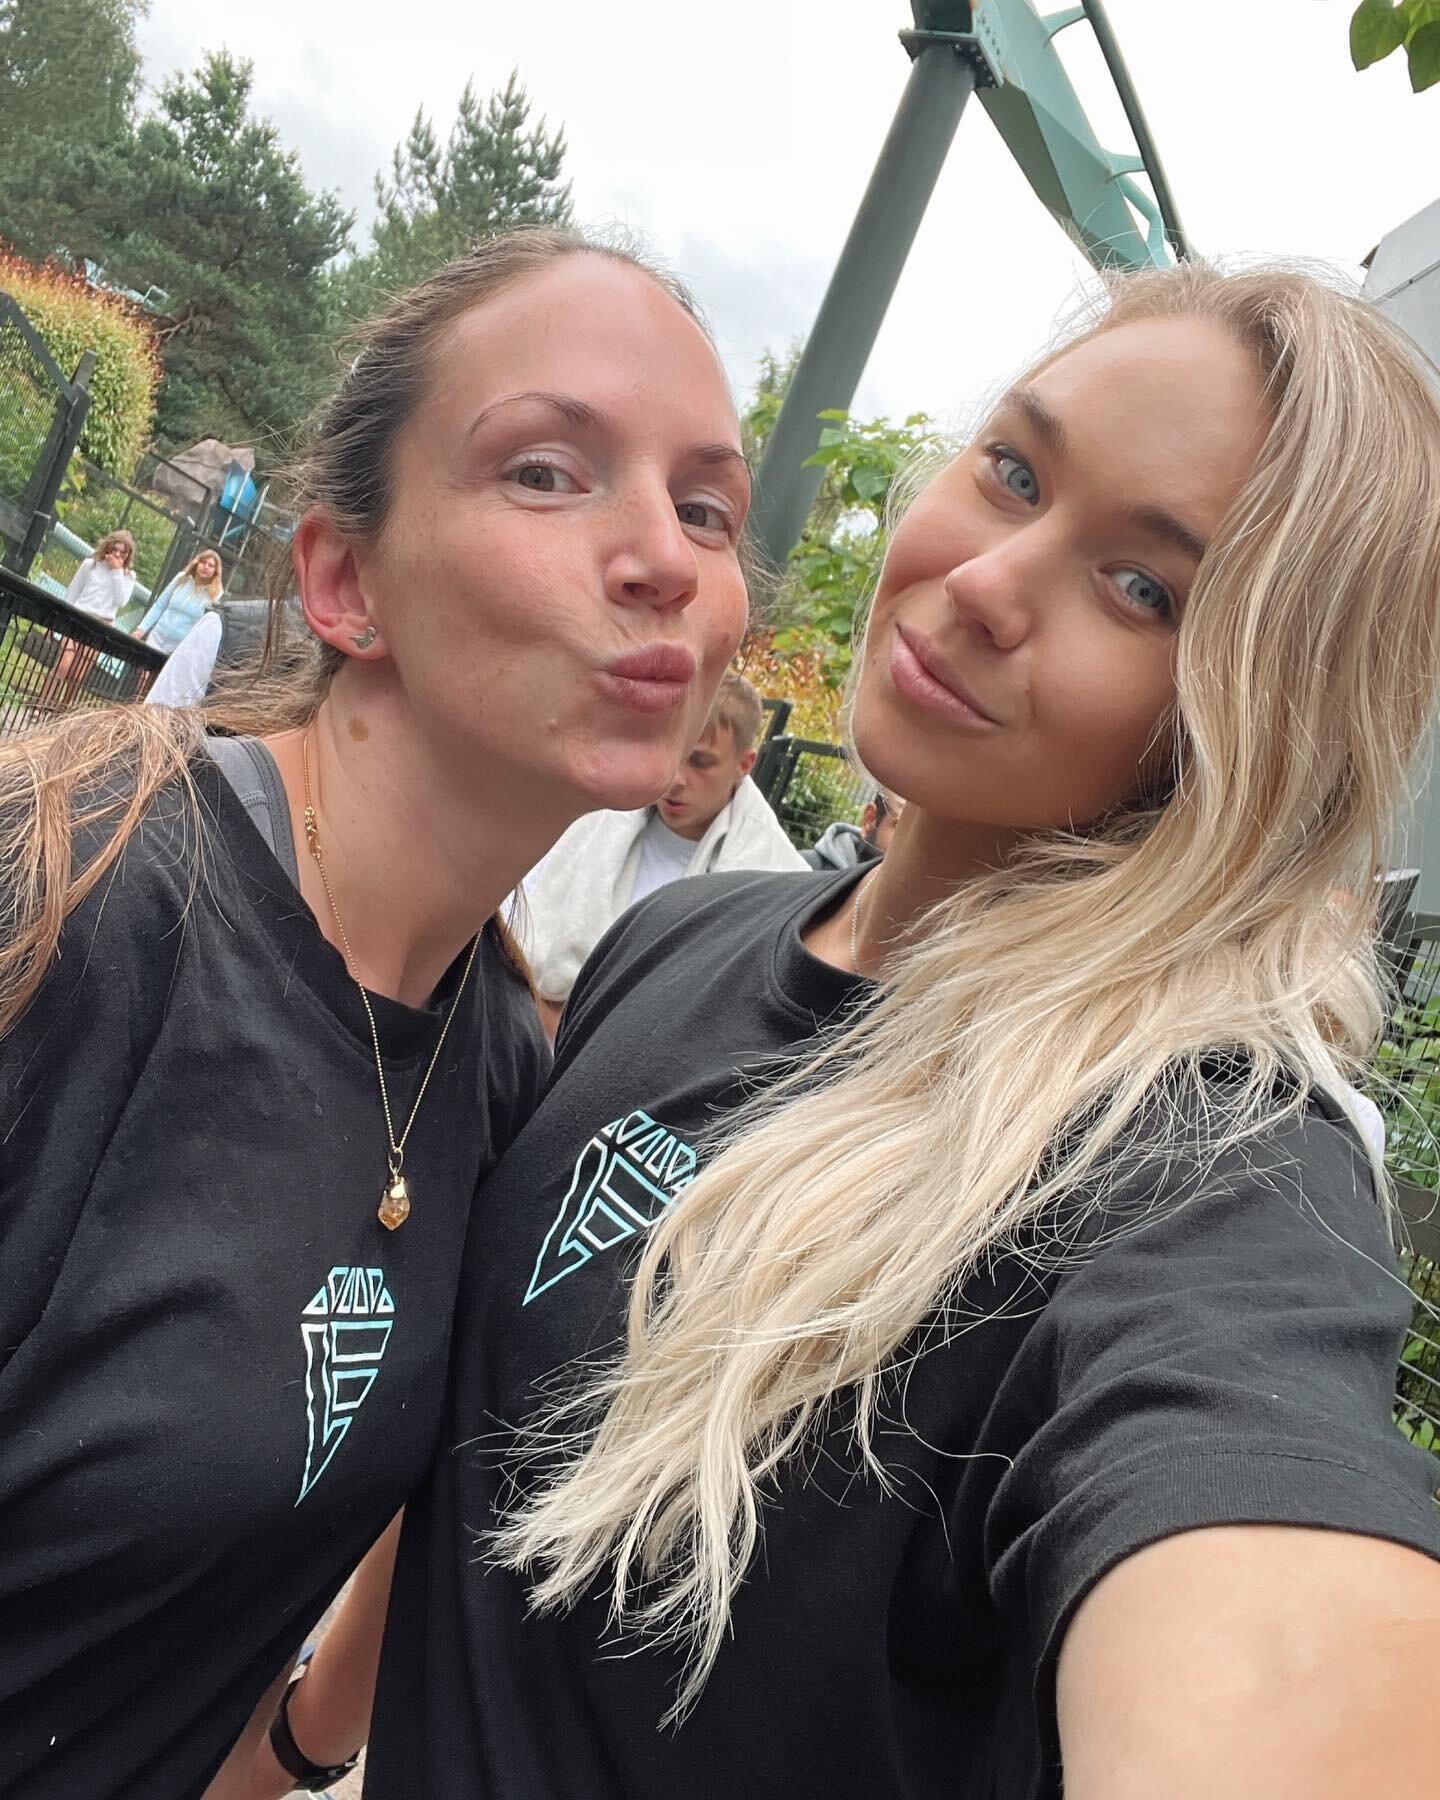 Gorgeous Gorgeous Girls ride rollercoasters wearing their LIVFIT Tops 💎 

Fun fact I&rsquo;m a huge theme park fan and used to visit Alton towers every year but haven&rsquo;t been for probably 5+ years! You can imagine how excited I was to try out t